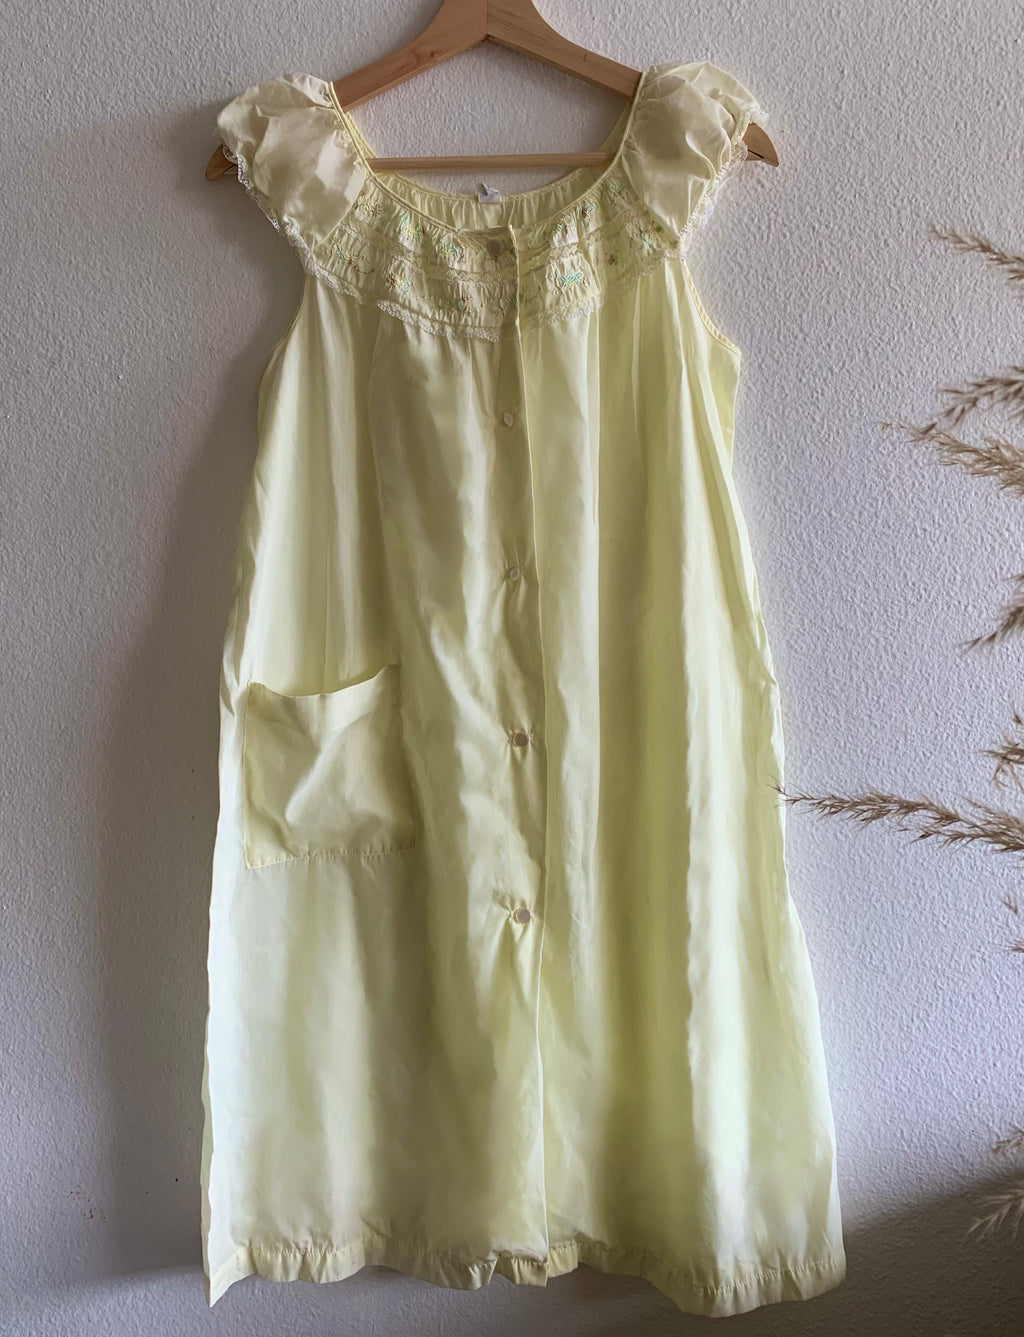 Pastel Yellow Nightgown Housecoat